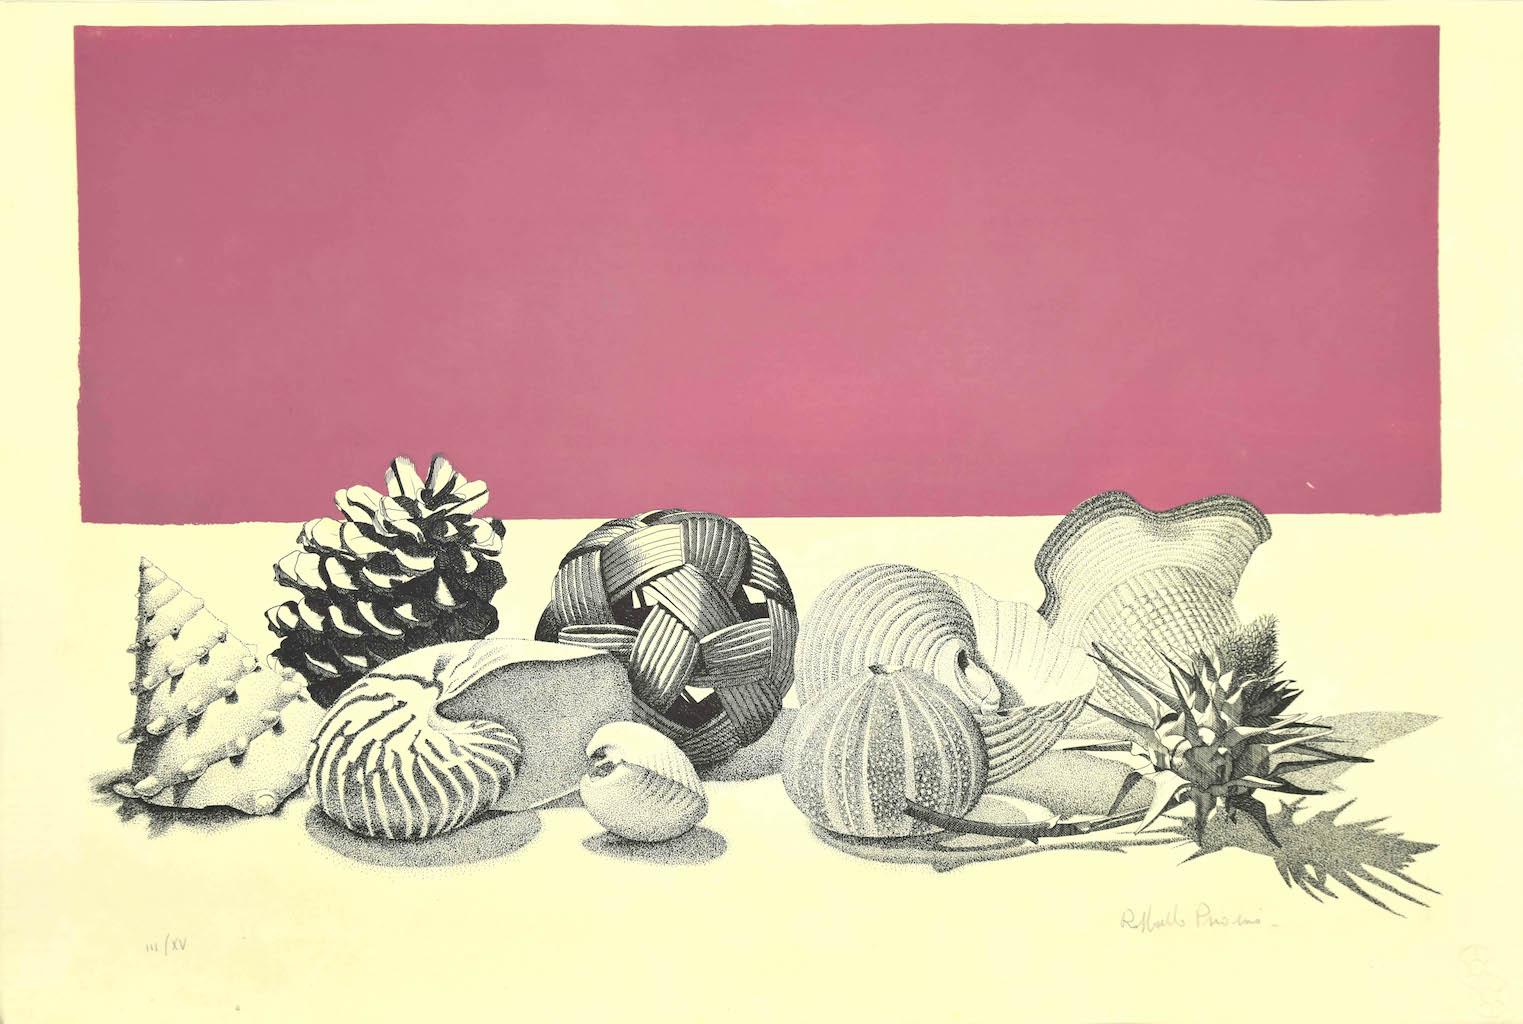 Still Life is an original colored lithograph on  ivory-colored paper, realized by Italian artist Raffaello Piraino (1938).

Hand-signed on the lower right in pencil. Numbered on the lower left in pencil, edition of III/XV prints.

The state of